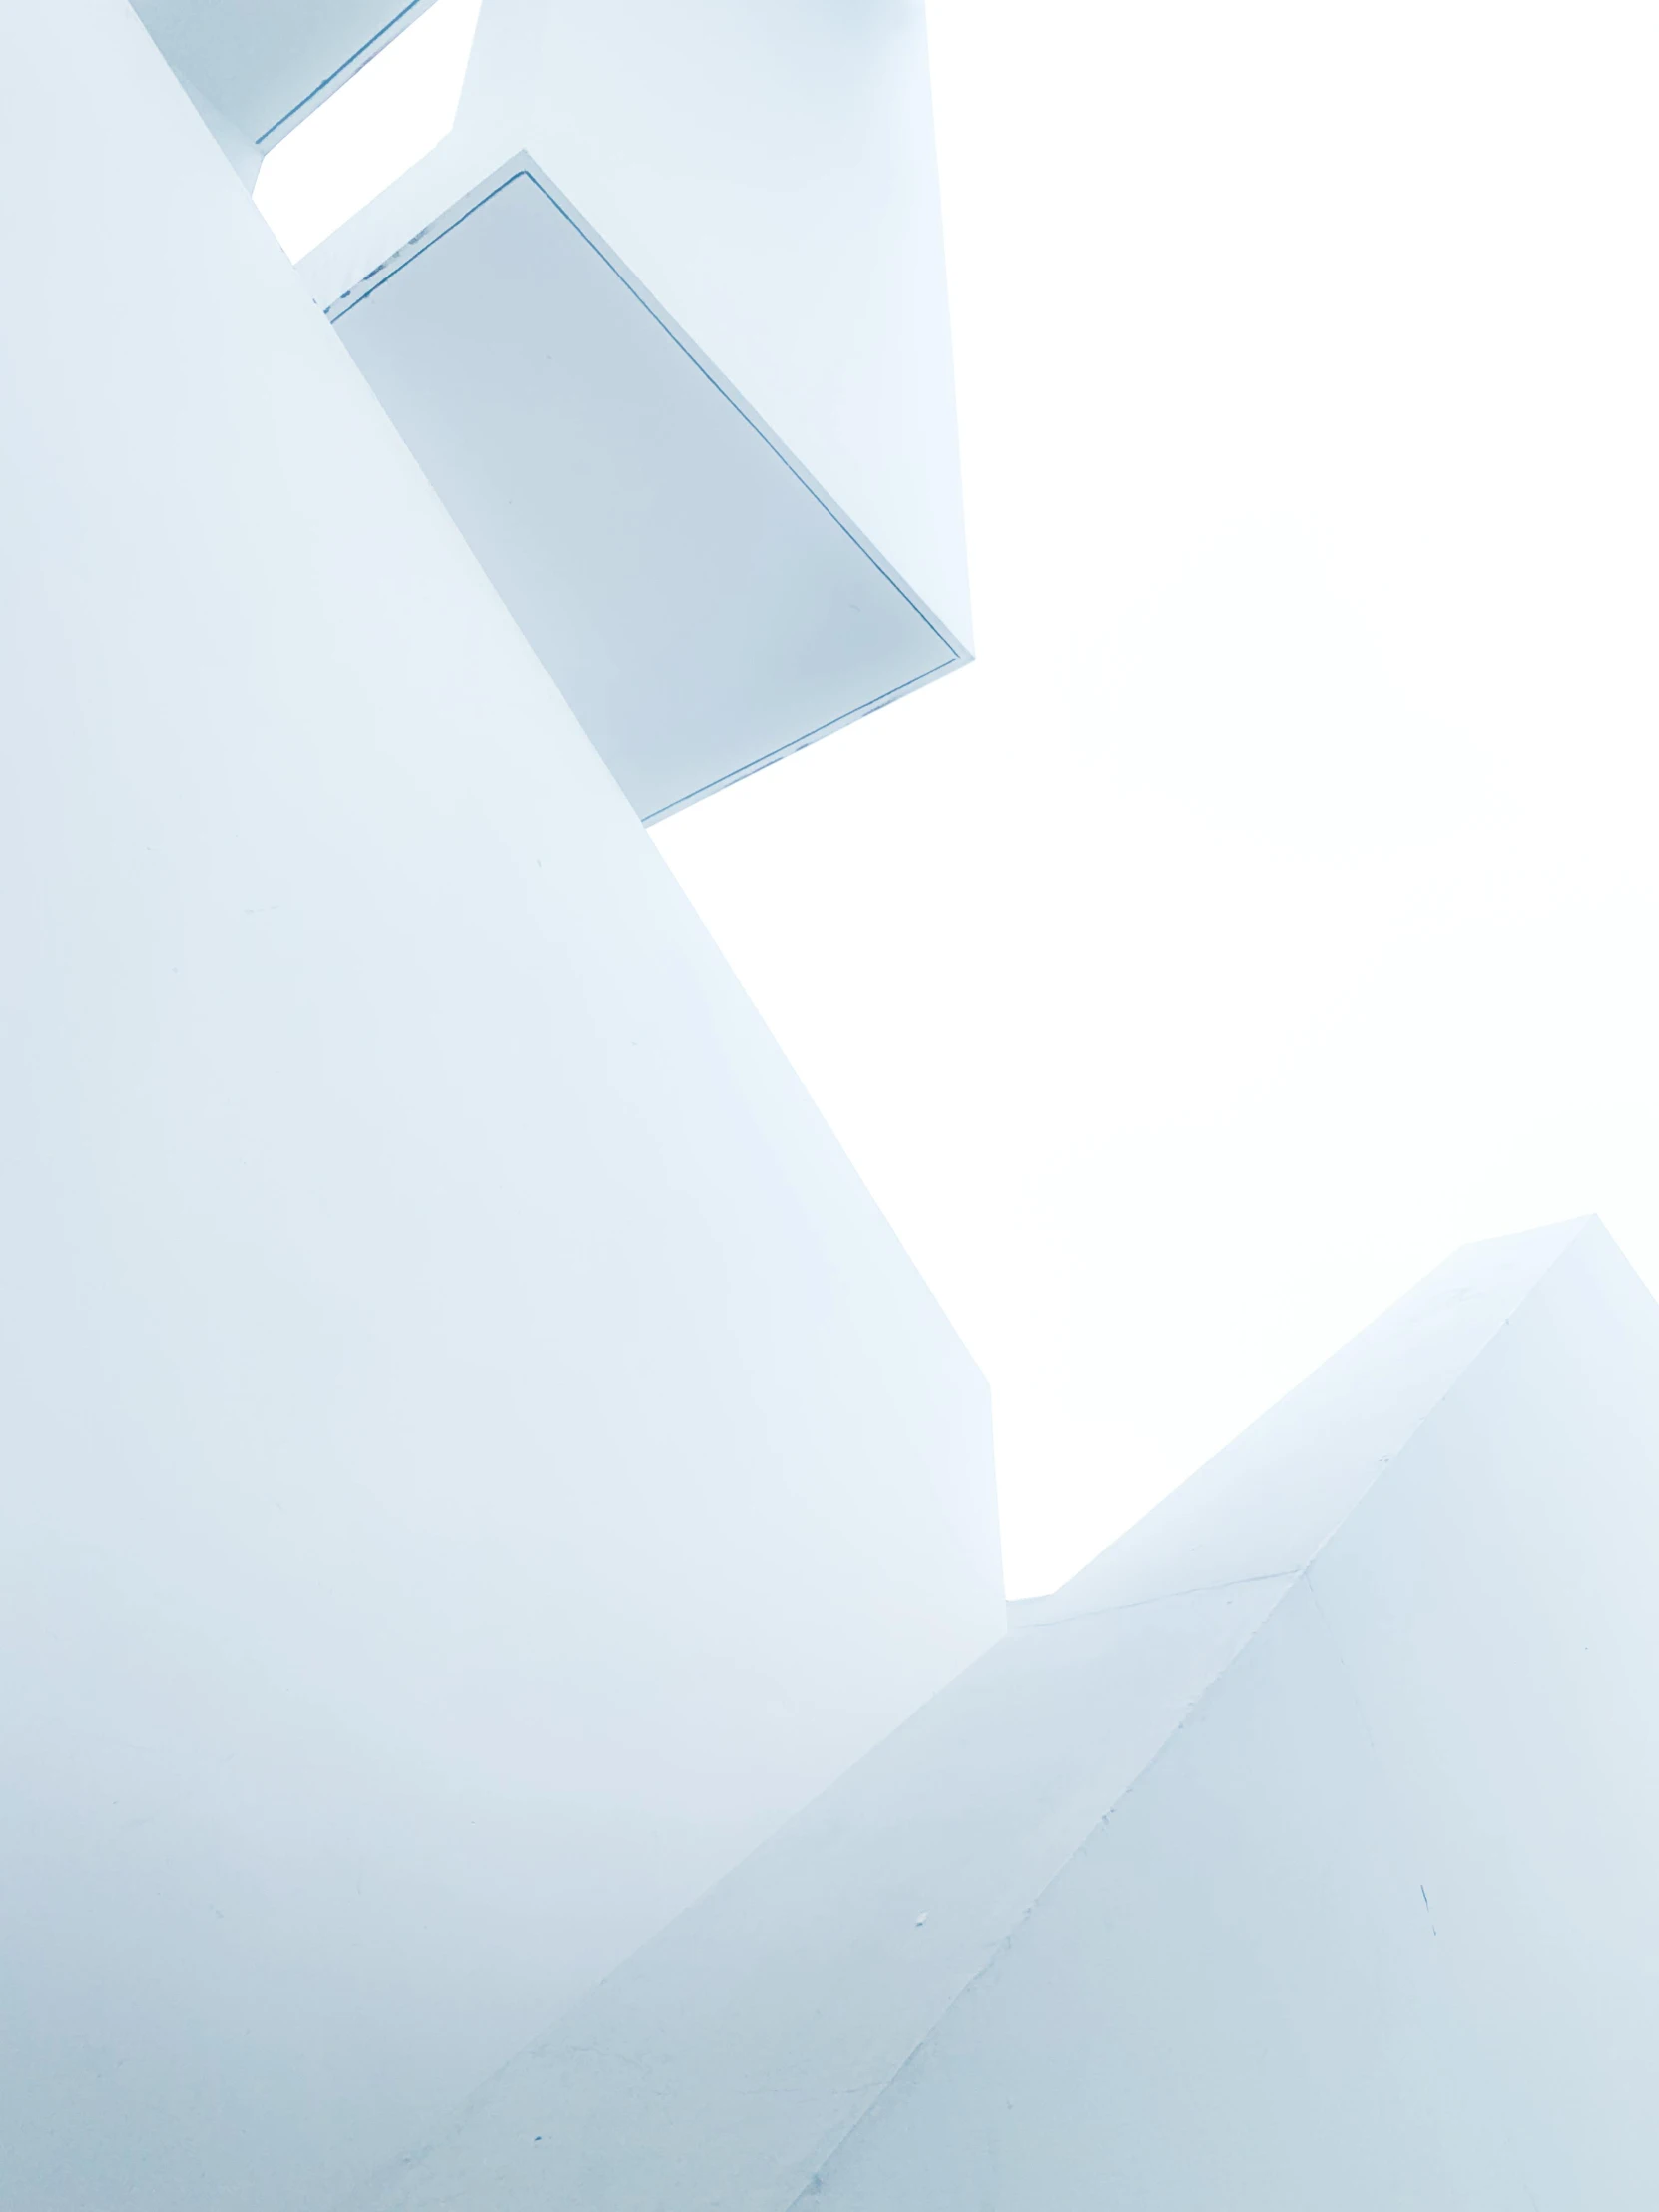 a man flying through the air while riding a snowboard, an abstract sculpture, unsplash contest winner, light and space, white minimalist architecture, background image, translucent cube, ((blue))